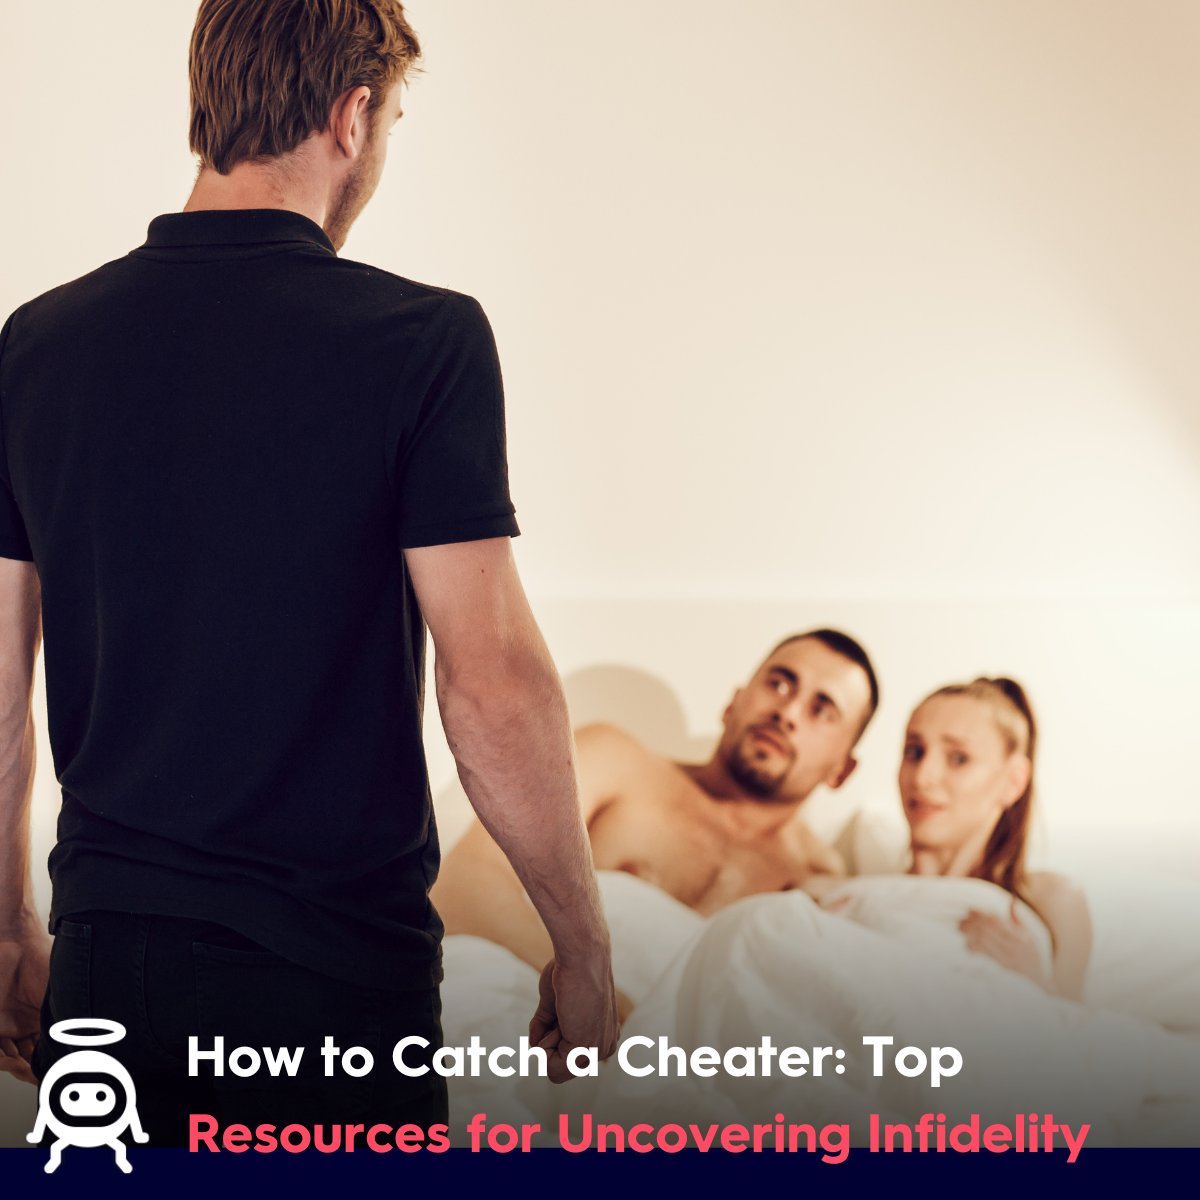 Need to catch a serial cheater? Here's how: bit.ly/3HC4cRV #cheater #cheating #infidelity #catchacheater